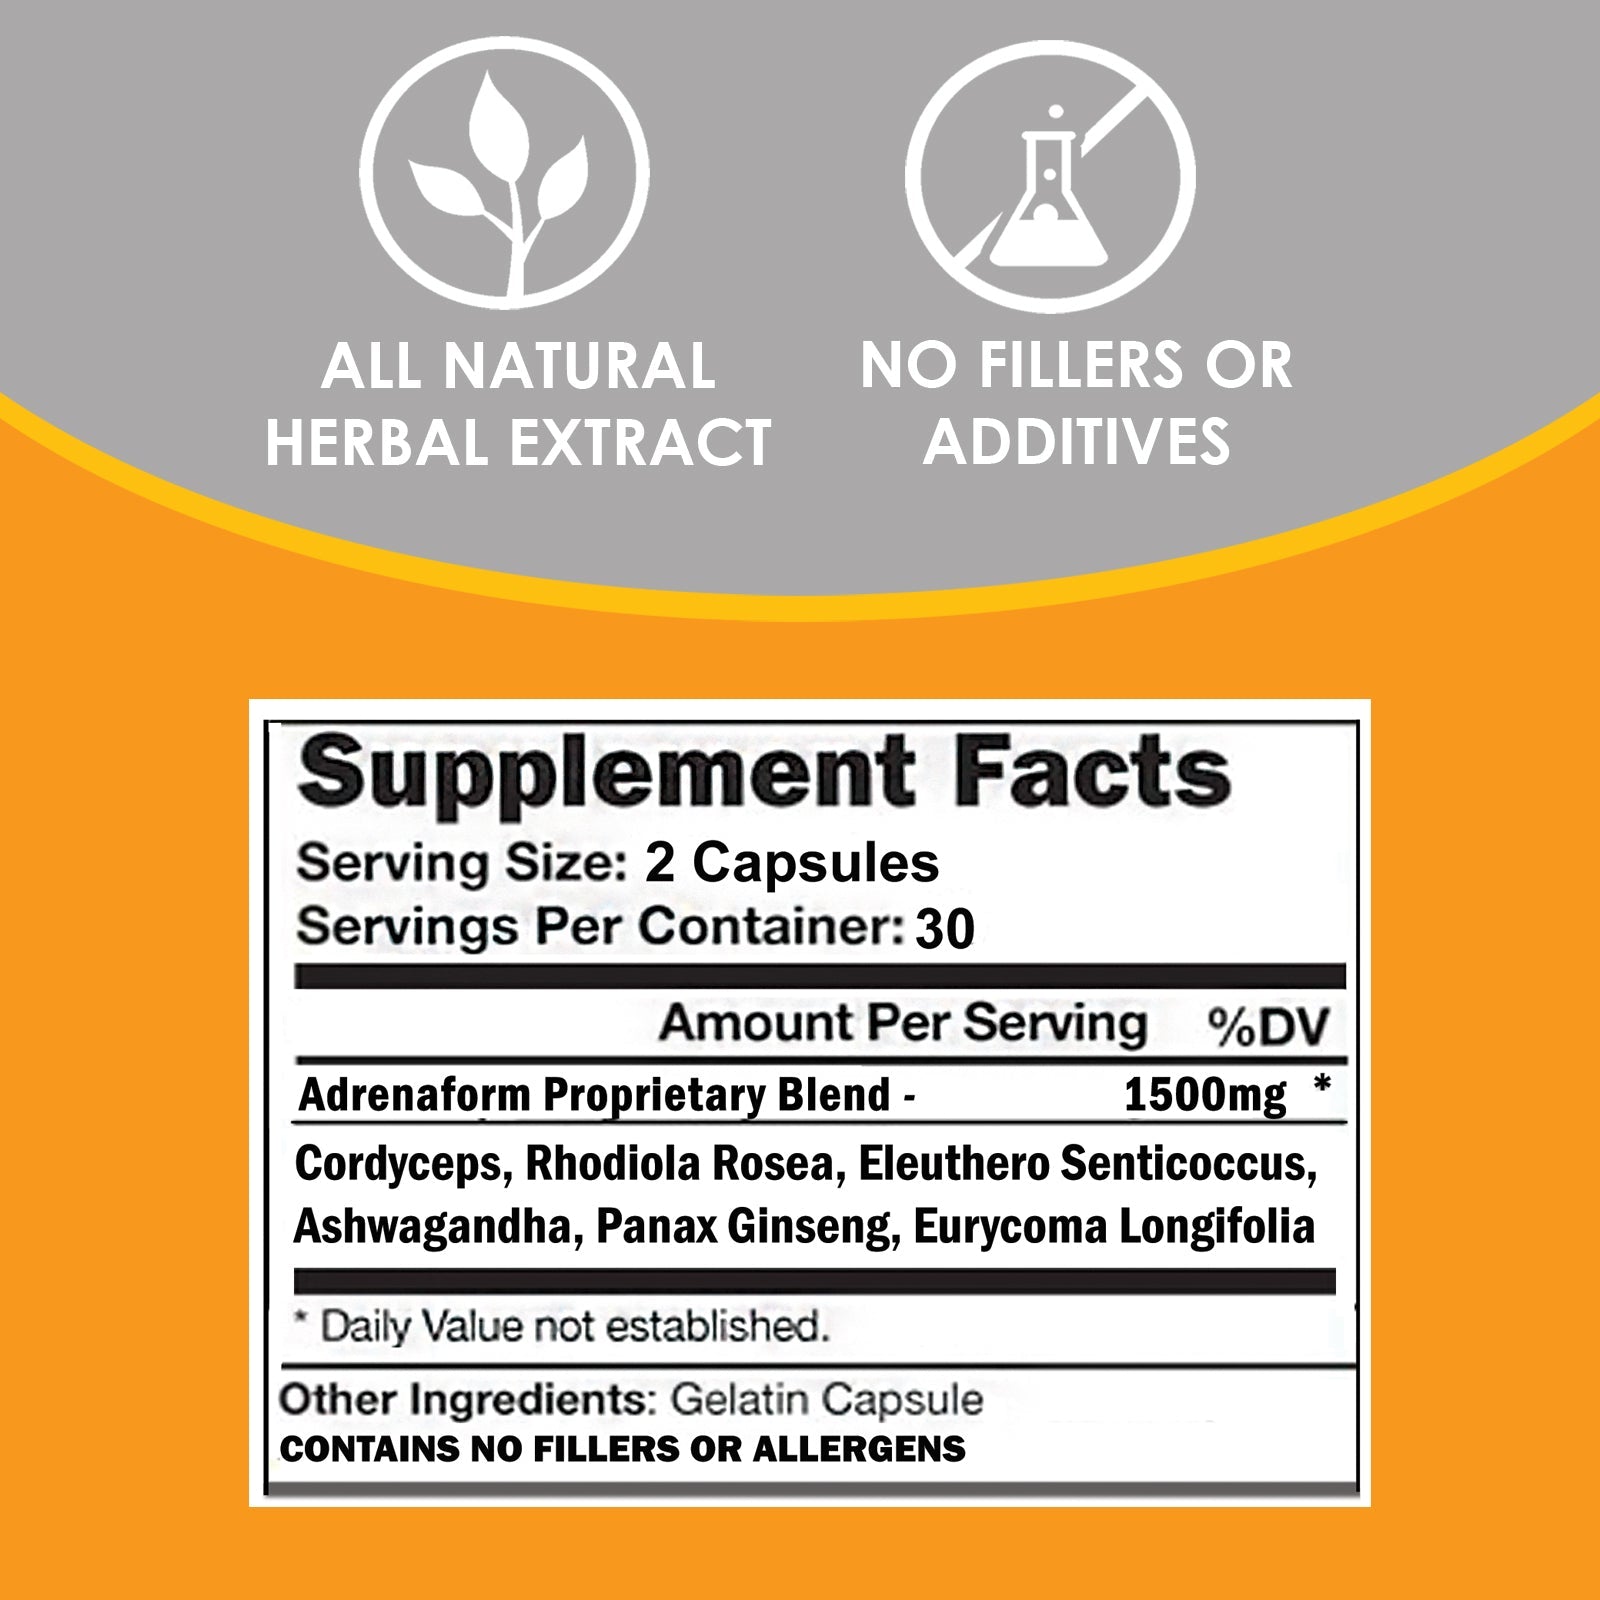 VH Nutrition ADRENAFORM | Adrenal Support* Supplement | Maximum Strength Hormone Support* for Men and Women | Rhodiola, Cordyceps, and Eleuthero | 60 Capsules